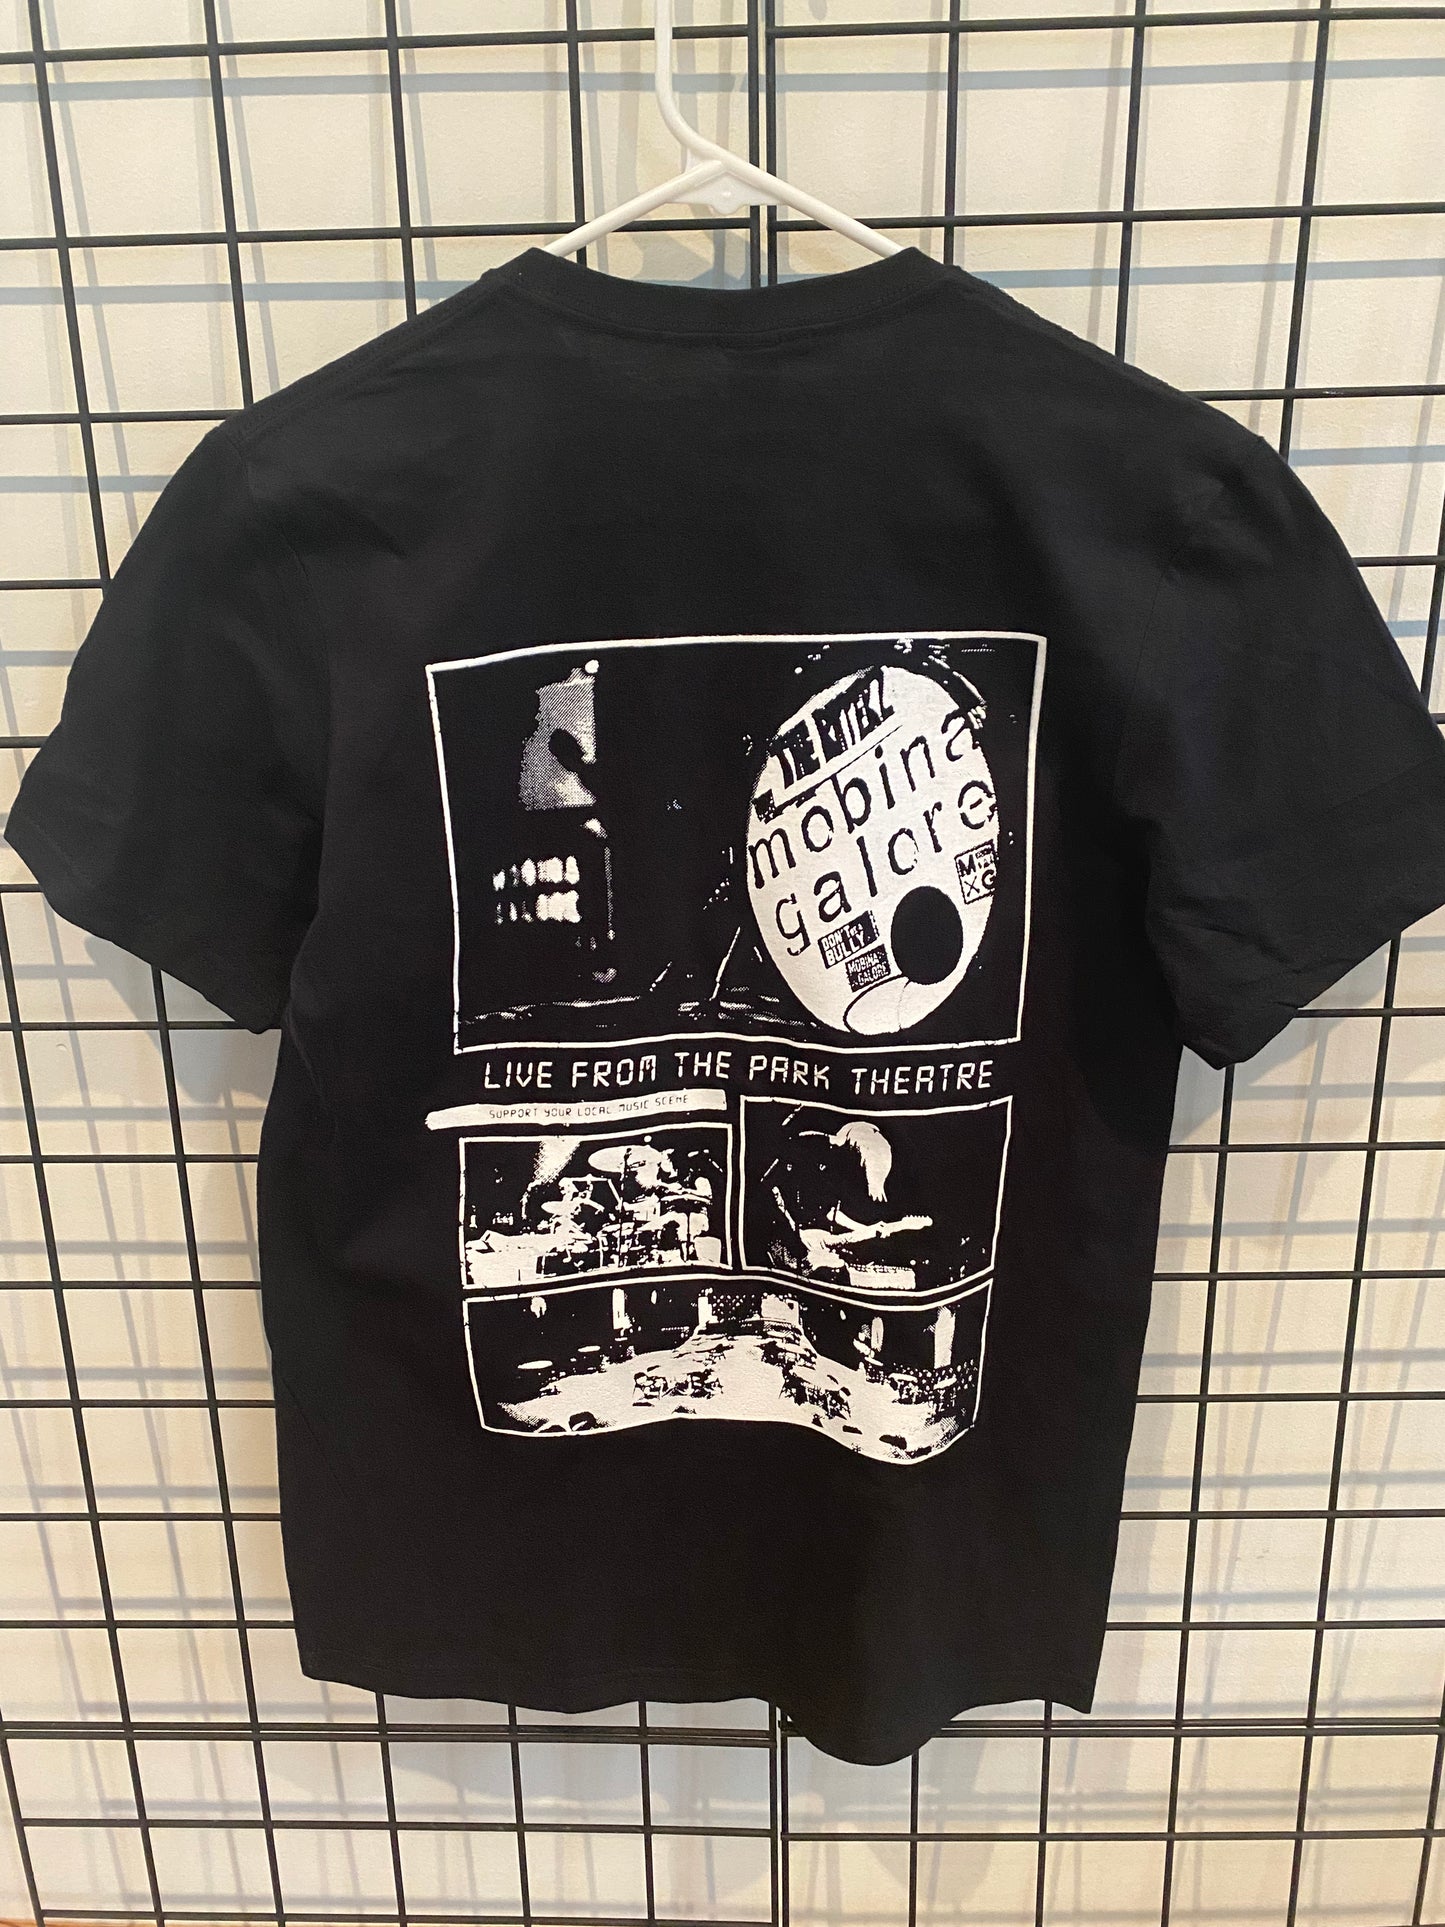 Mobina Galore - 'Live from the Park Theatre' T-Shirt